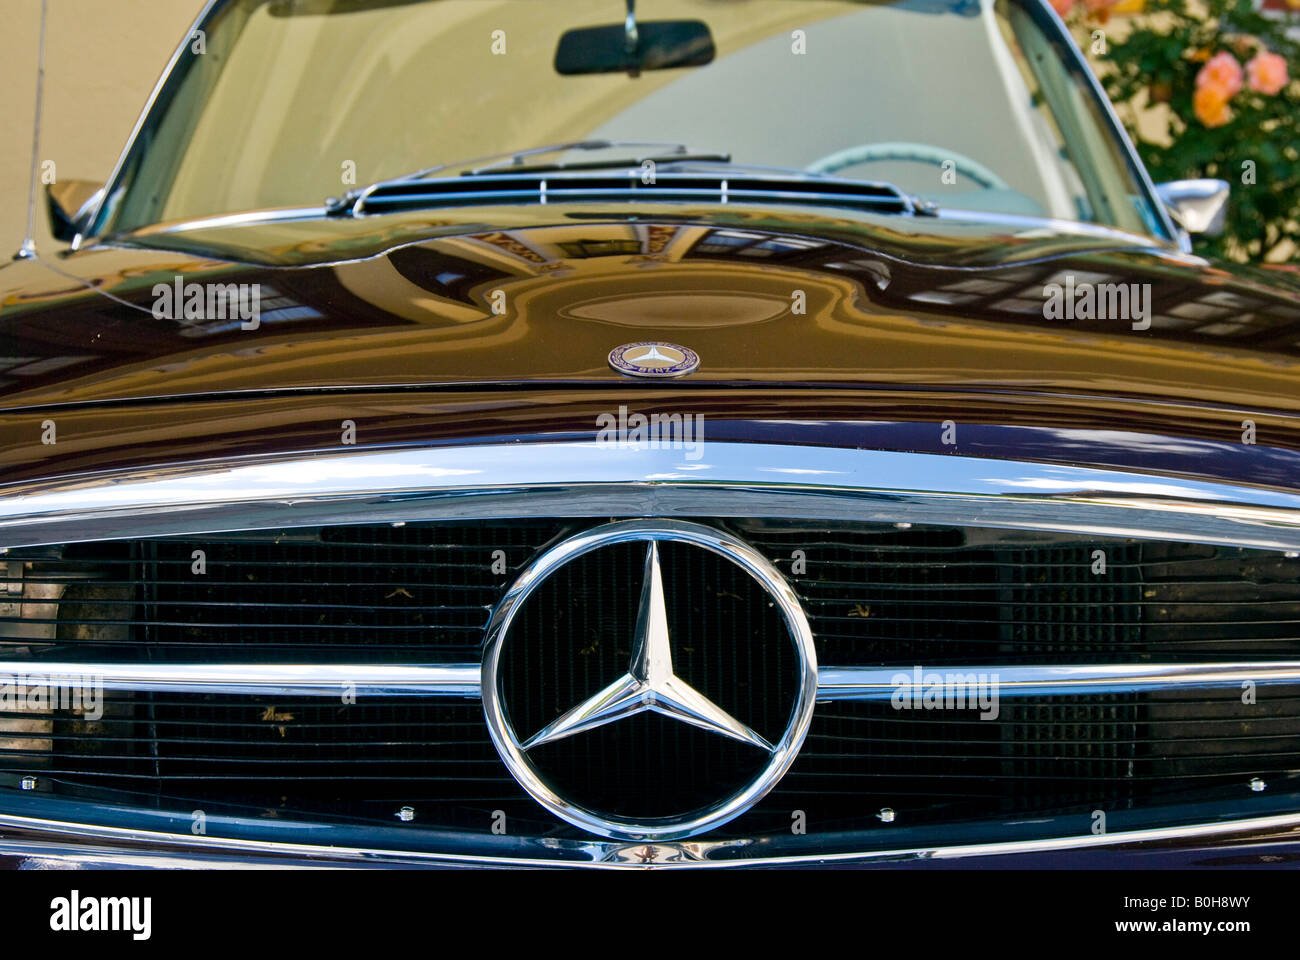 Vintage or classic car radiator grill and Mercedes star symbol, Mercedes-Benz  190 S Stock Photo - Alamy